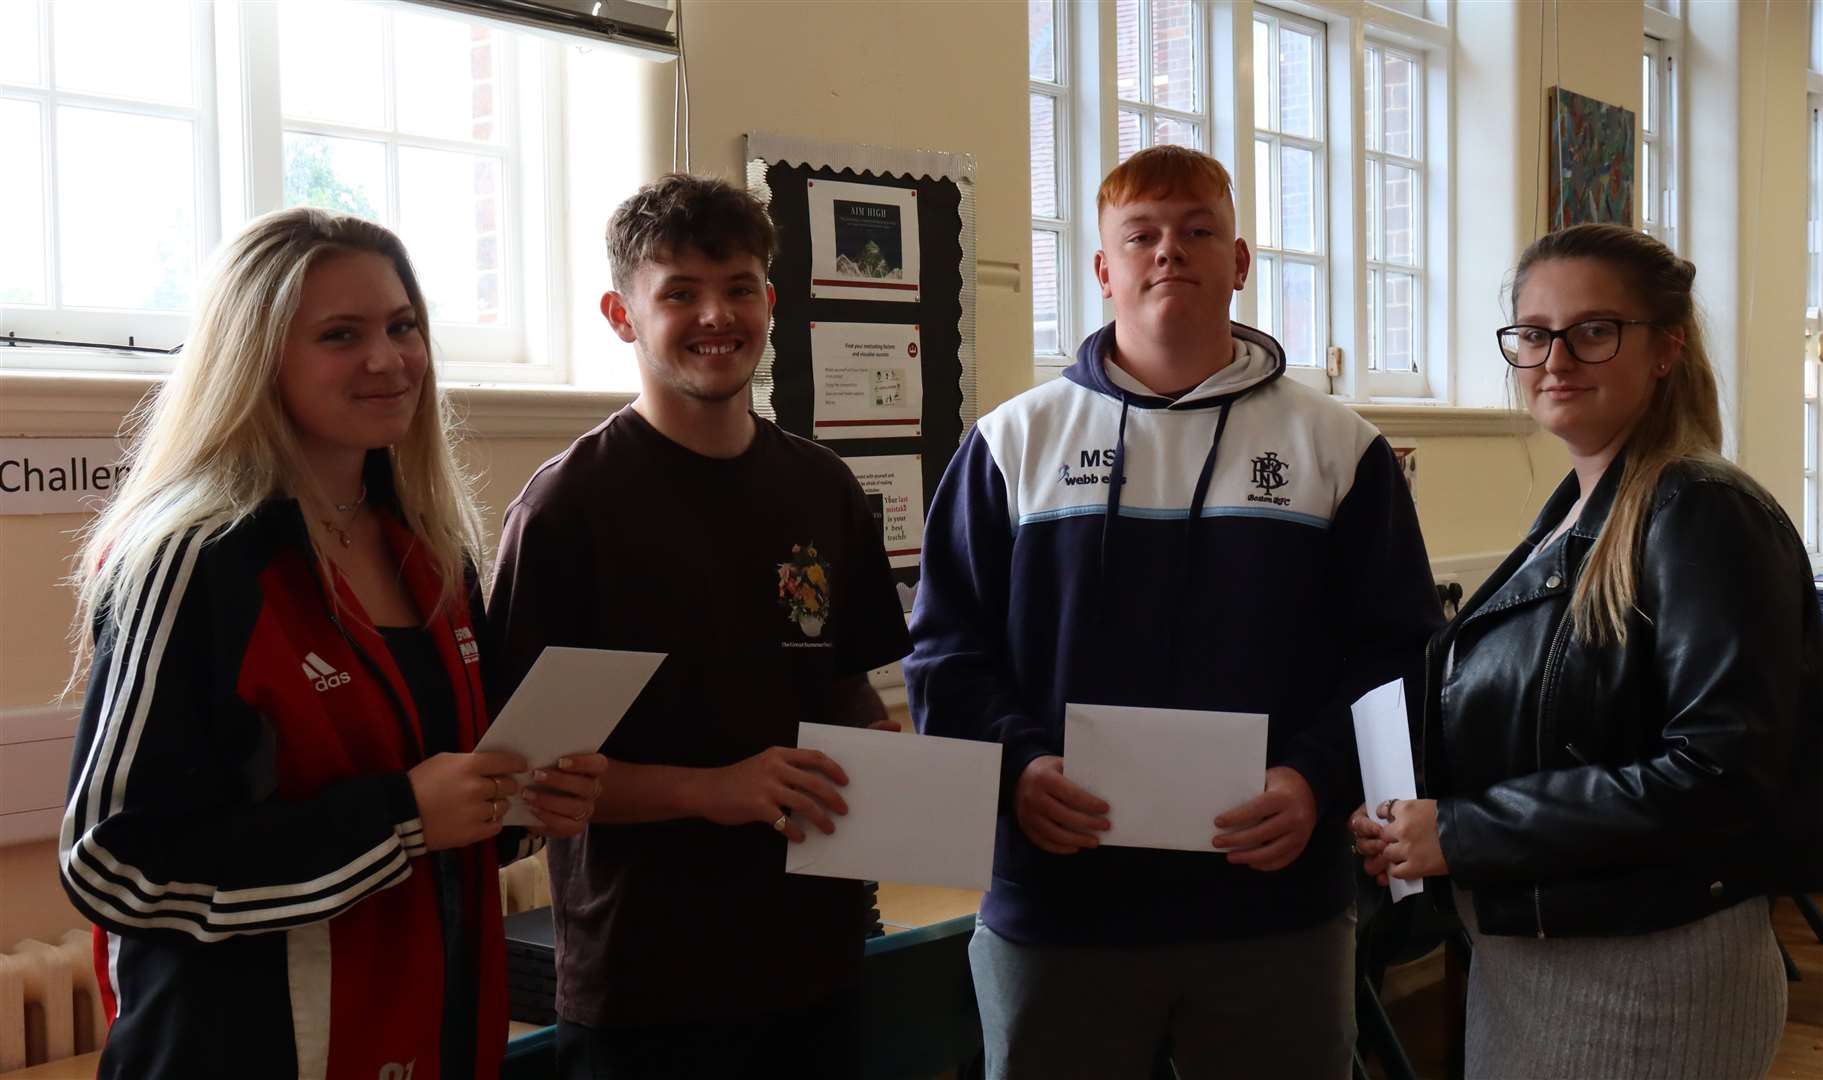 Students with their results at KES